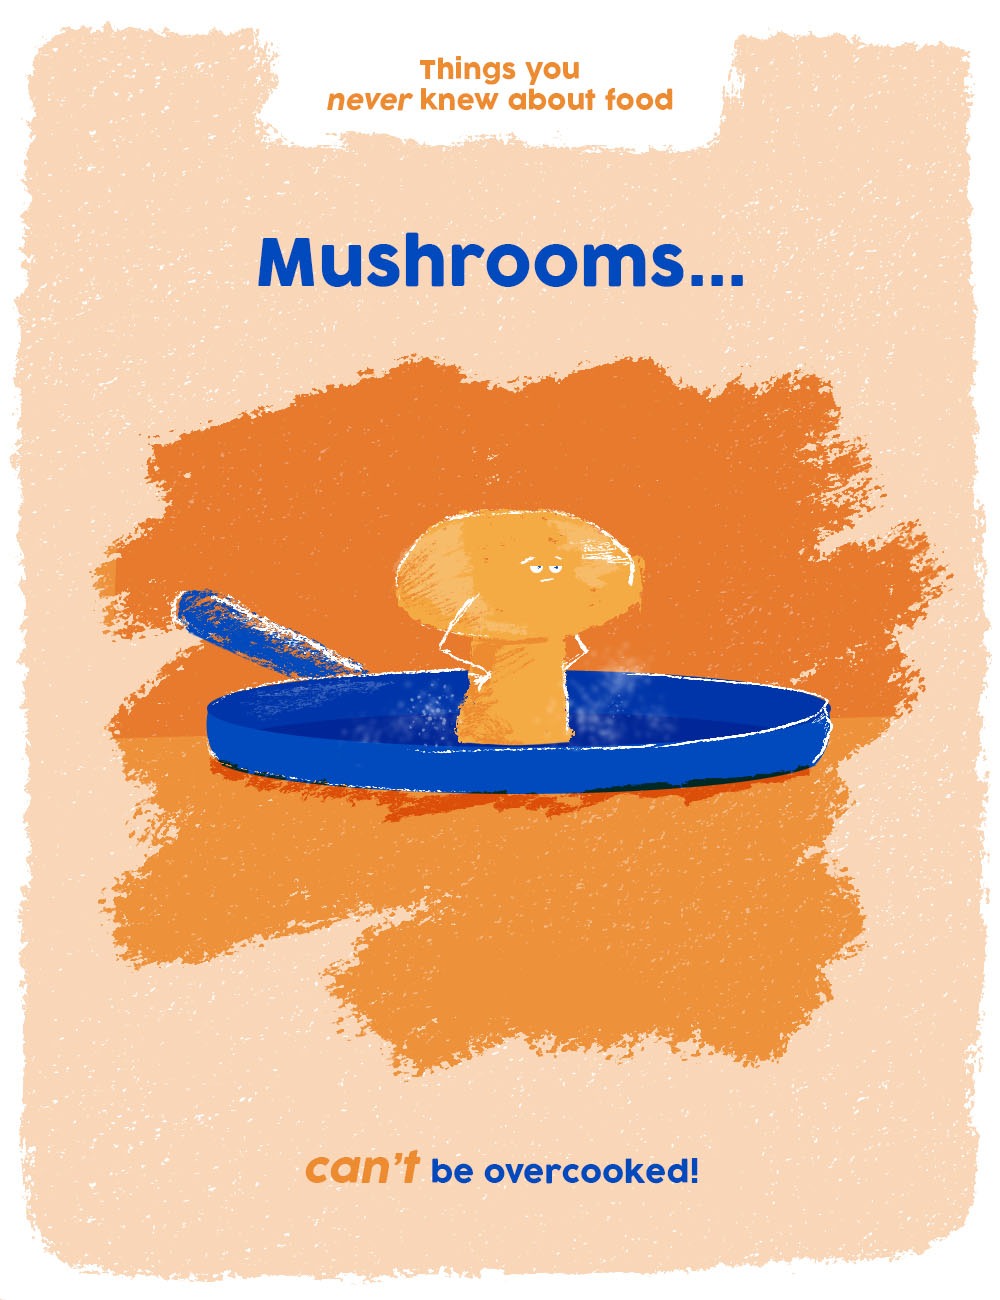 things you never knew about food graphics - mushrooms can't be overcooked